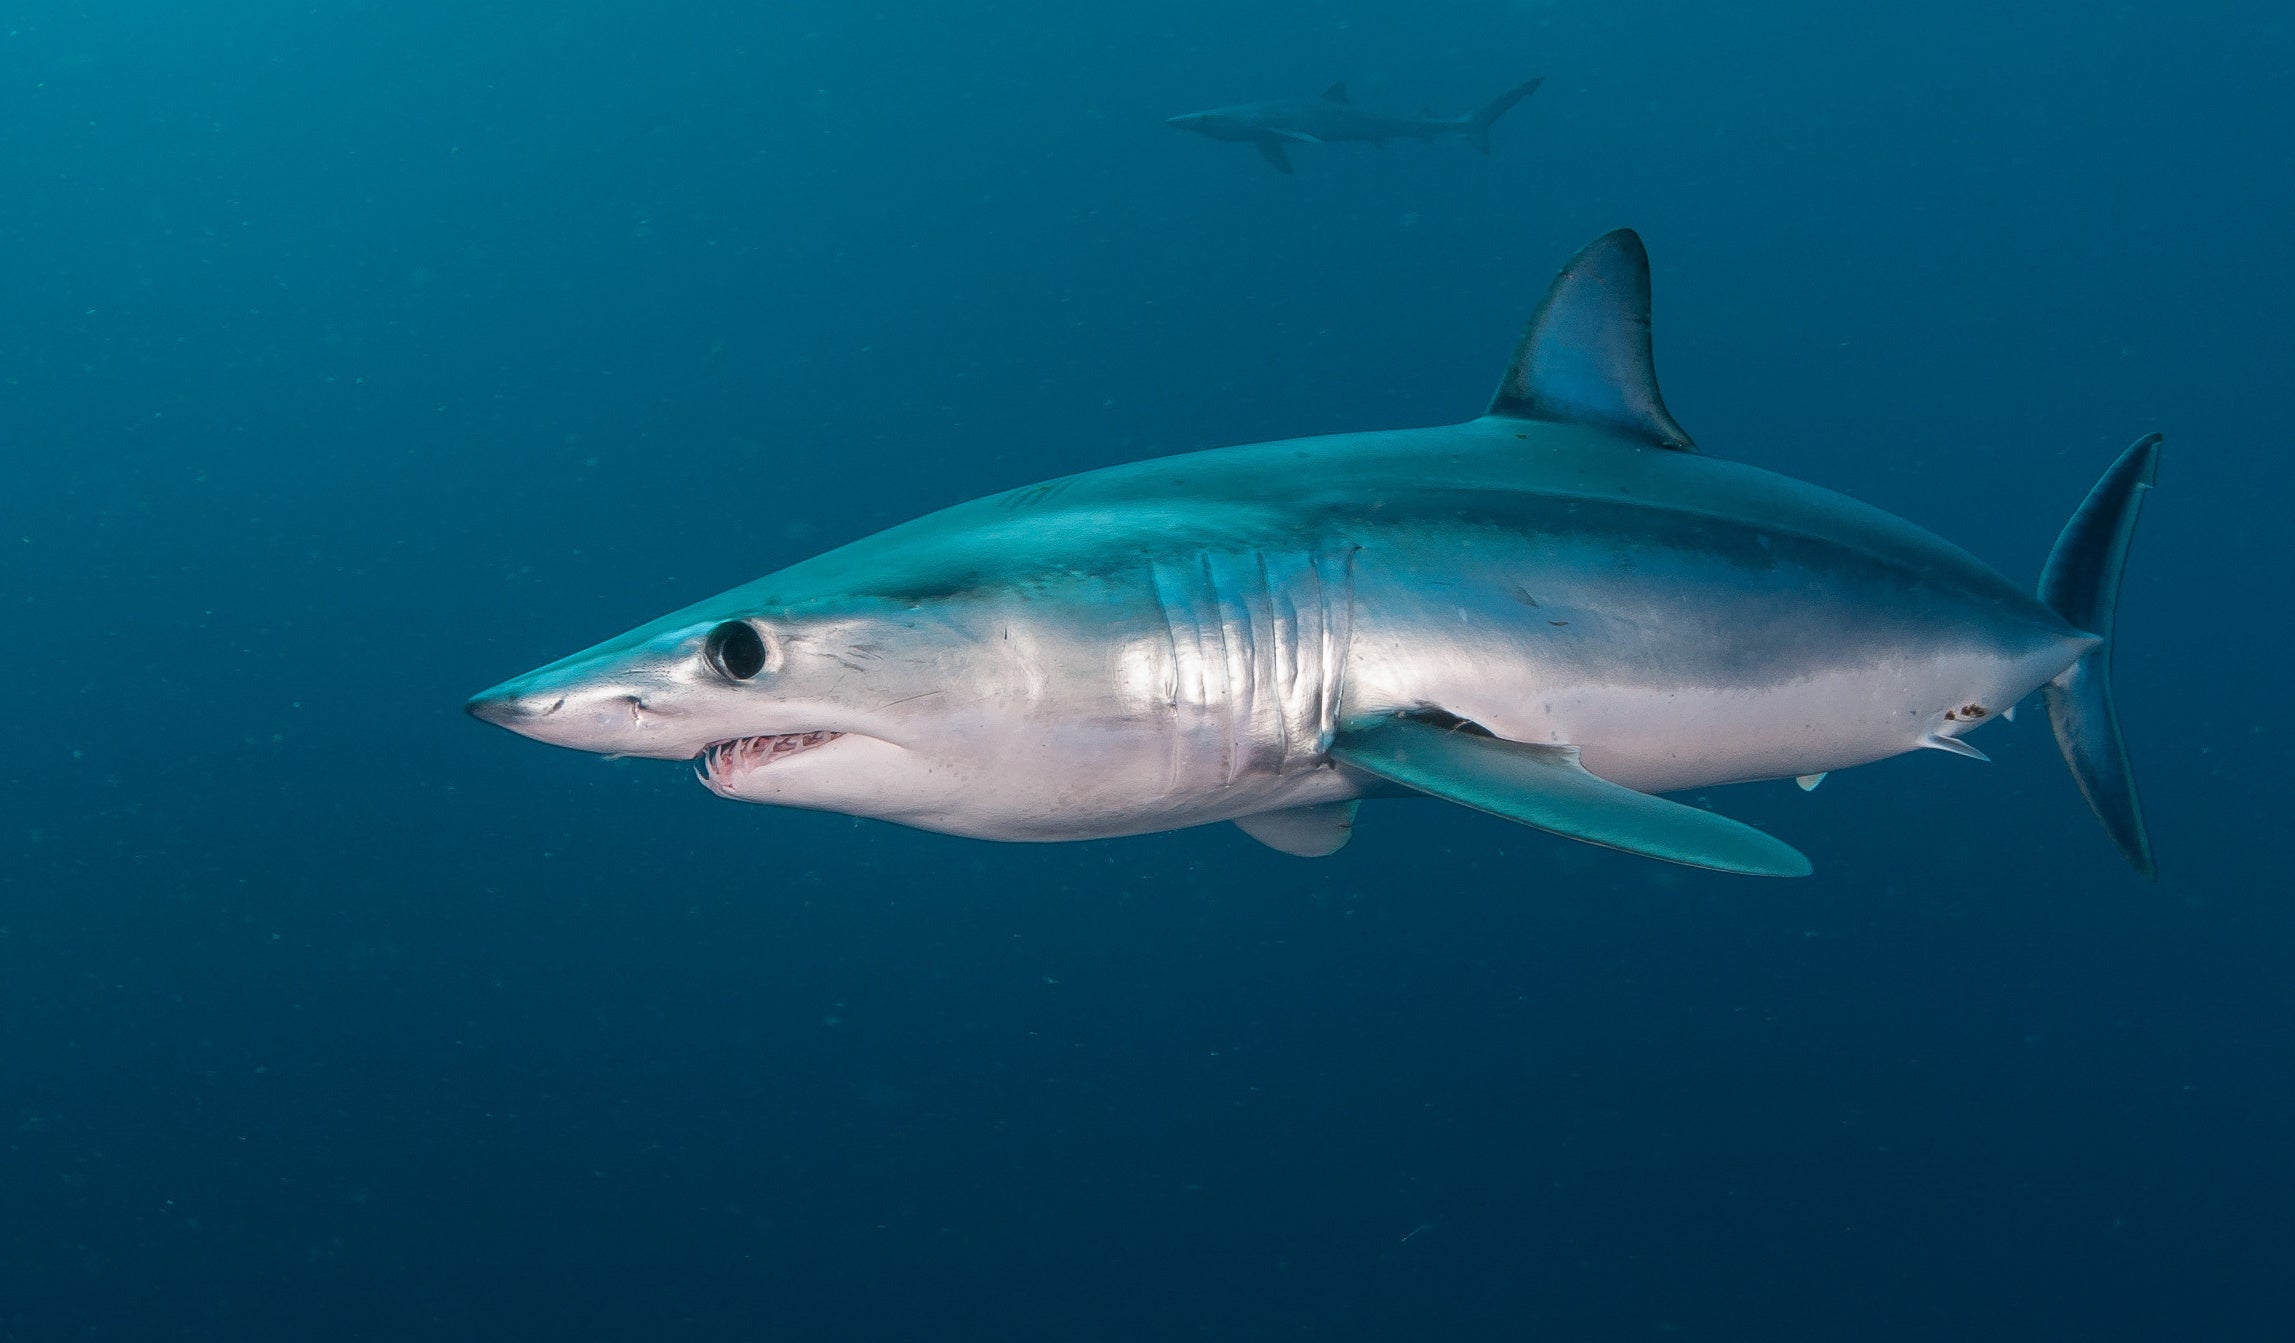 a shortfin mako, which can live 30 years